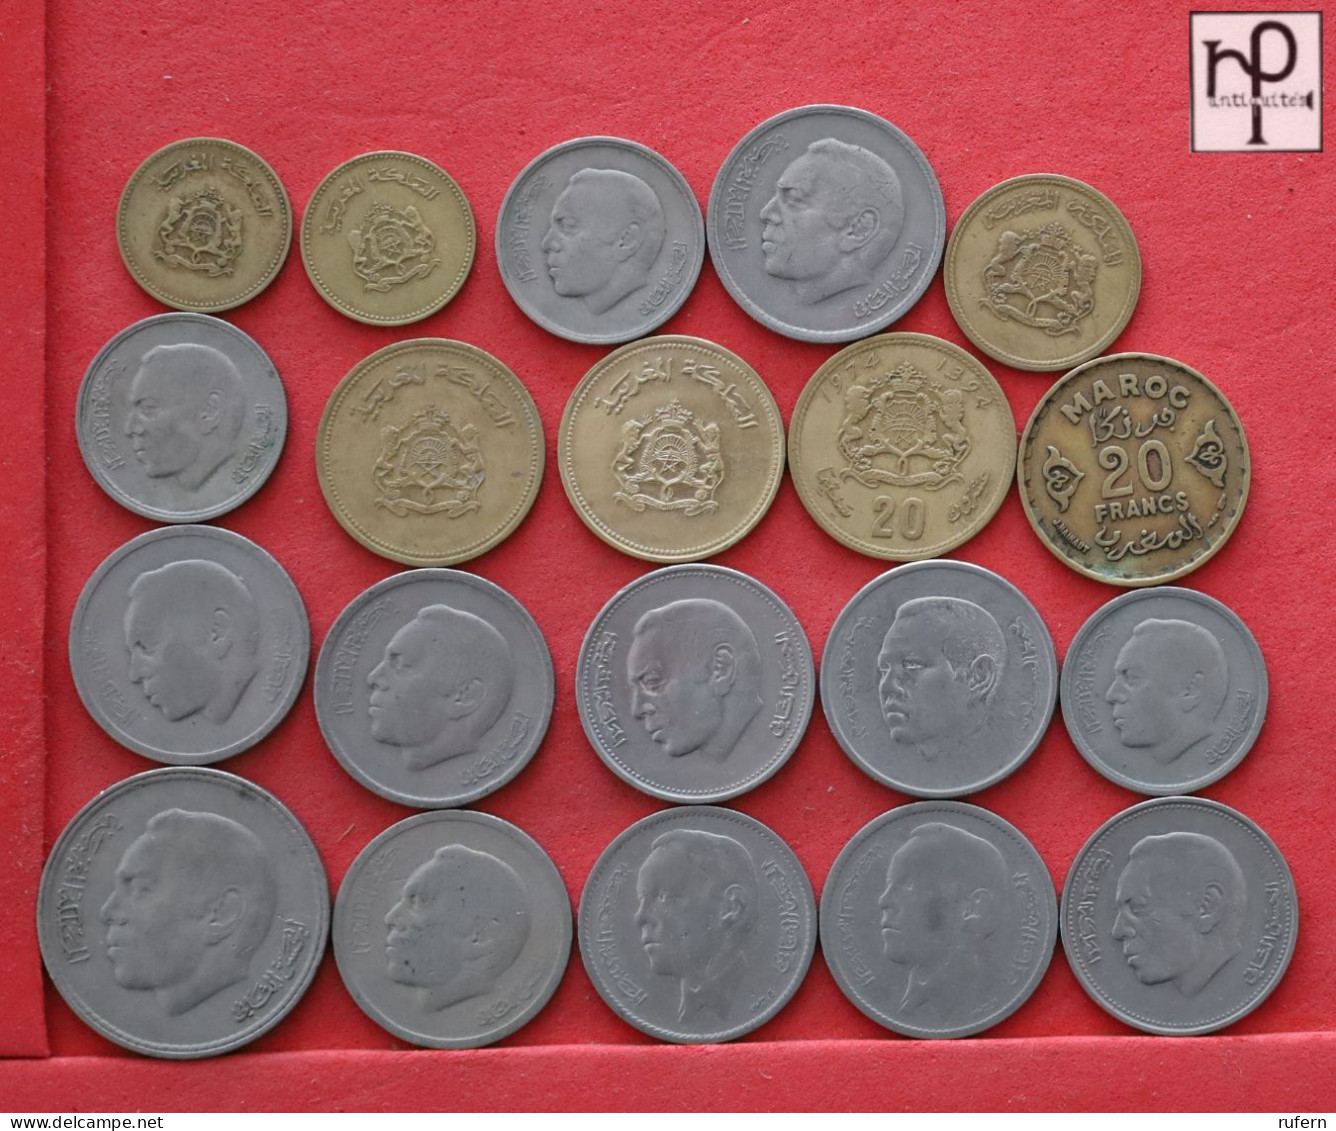 MOROCCO  - LOT - 20 COINS - 2 SCANS  - (Nº58269) - Lots & Kiloware - Coins